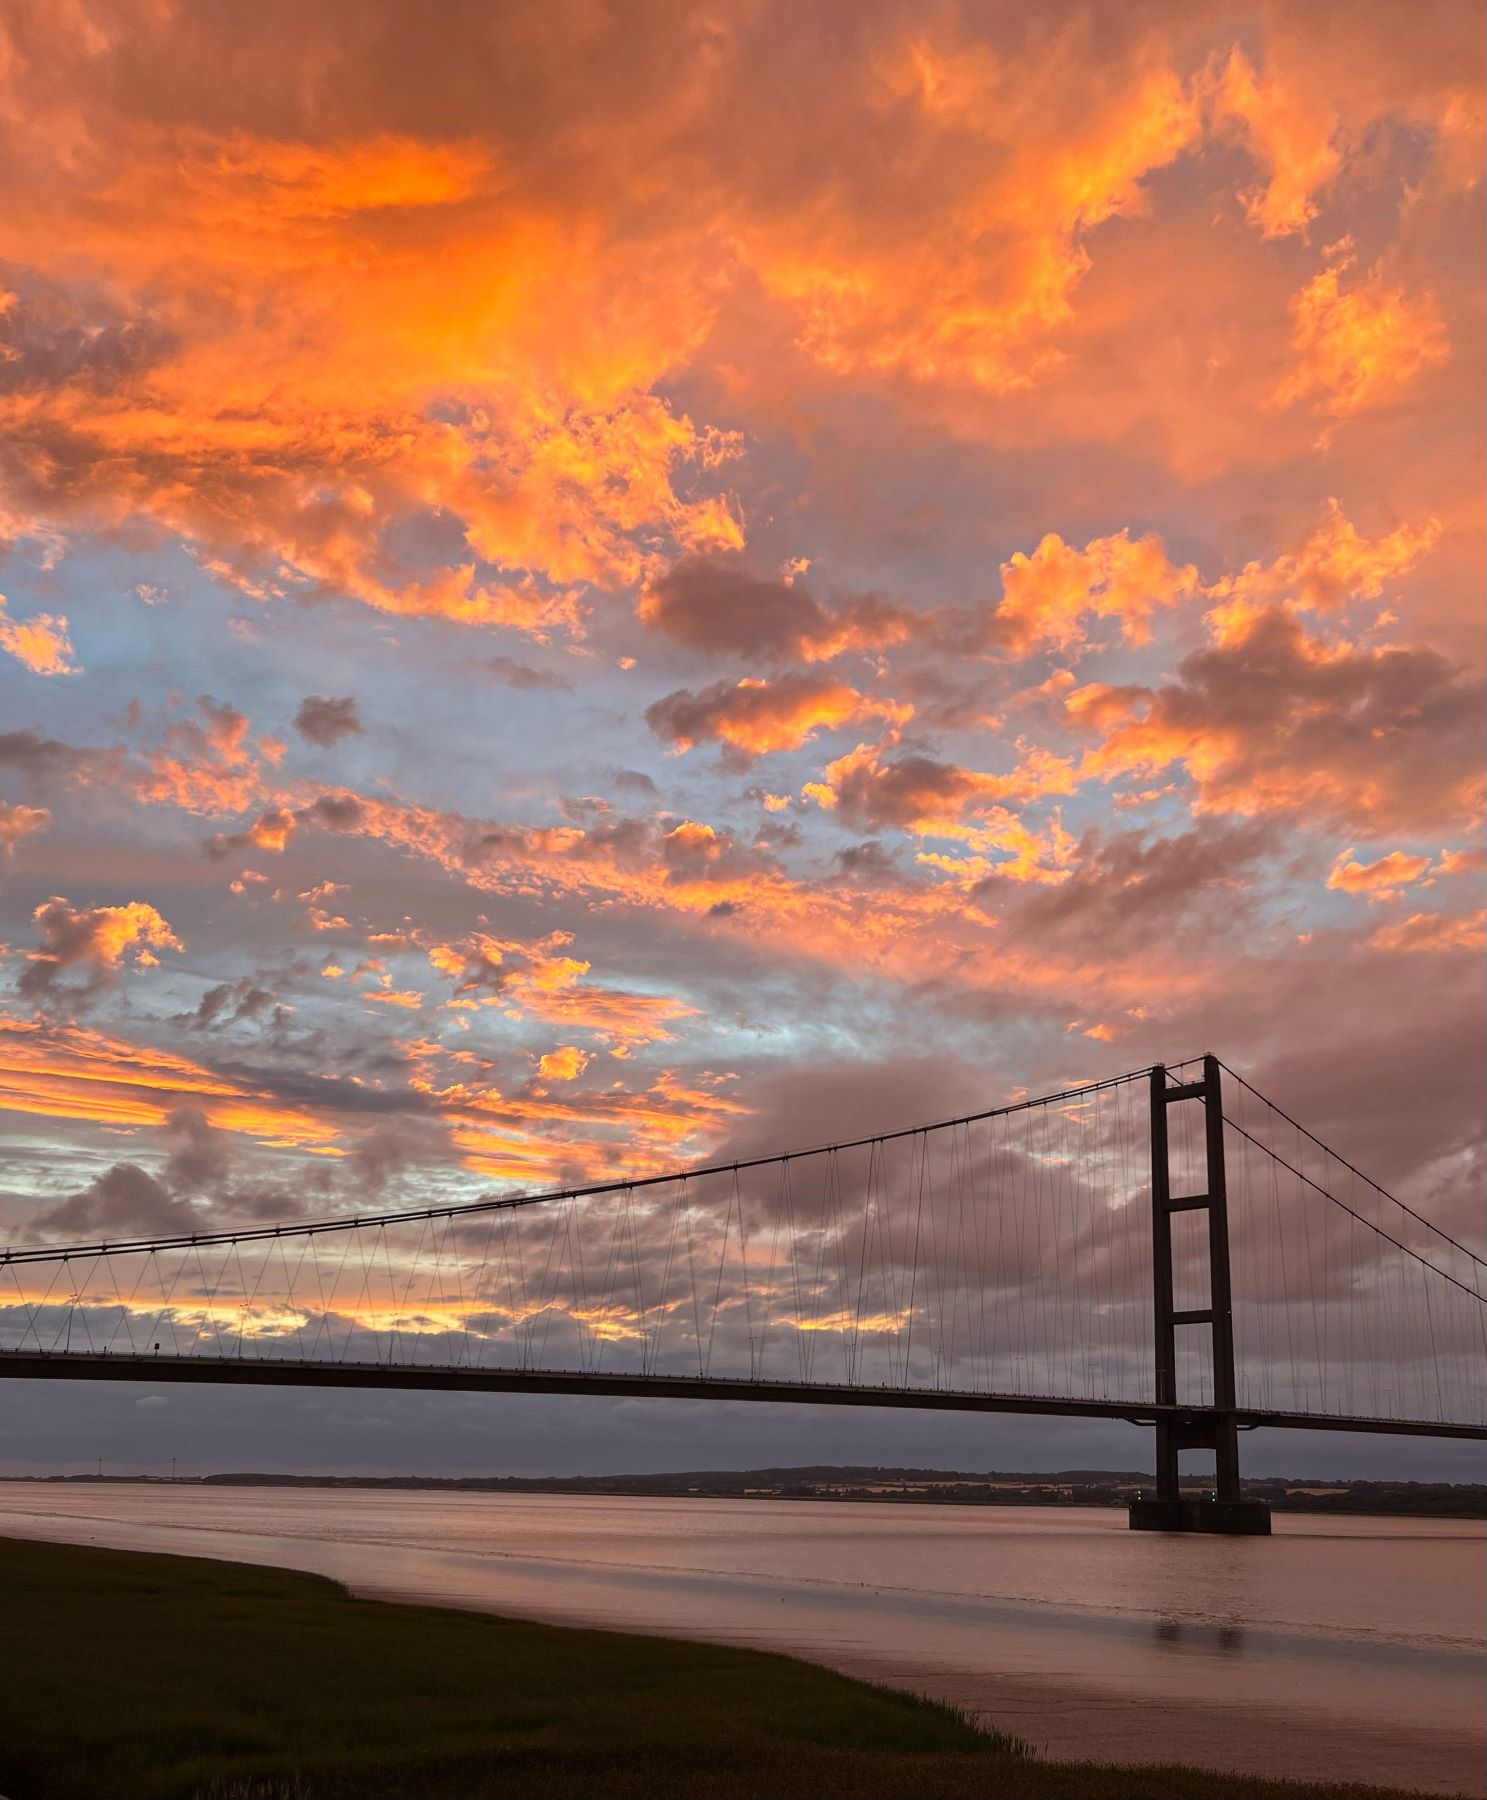 A photo from one bank of a river crossed by a suspension bridge at sunset, with skies coloured orange, pink, yellow, blue and grey